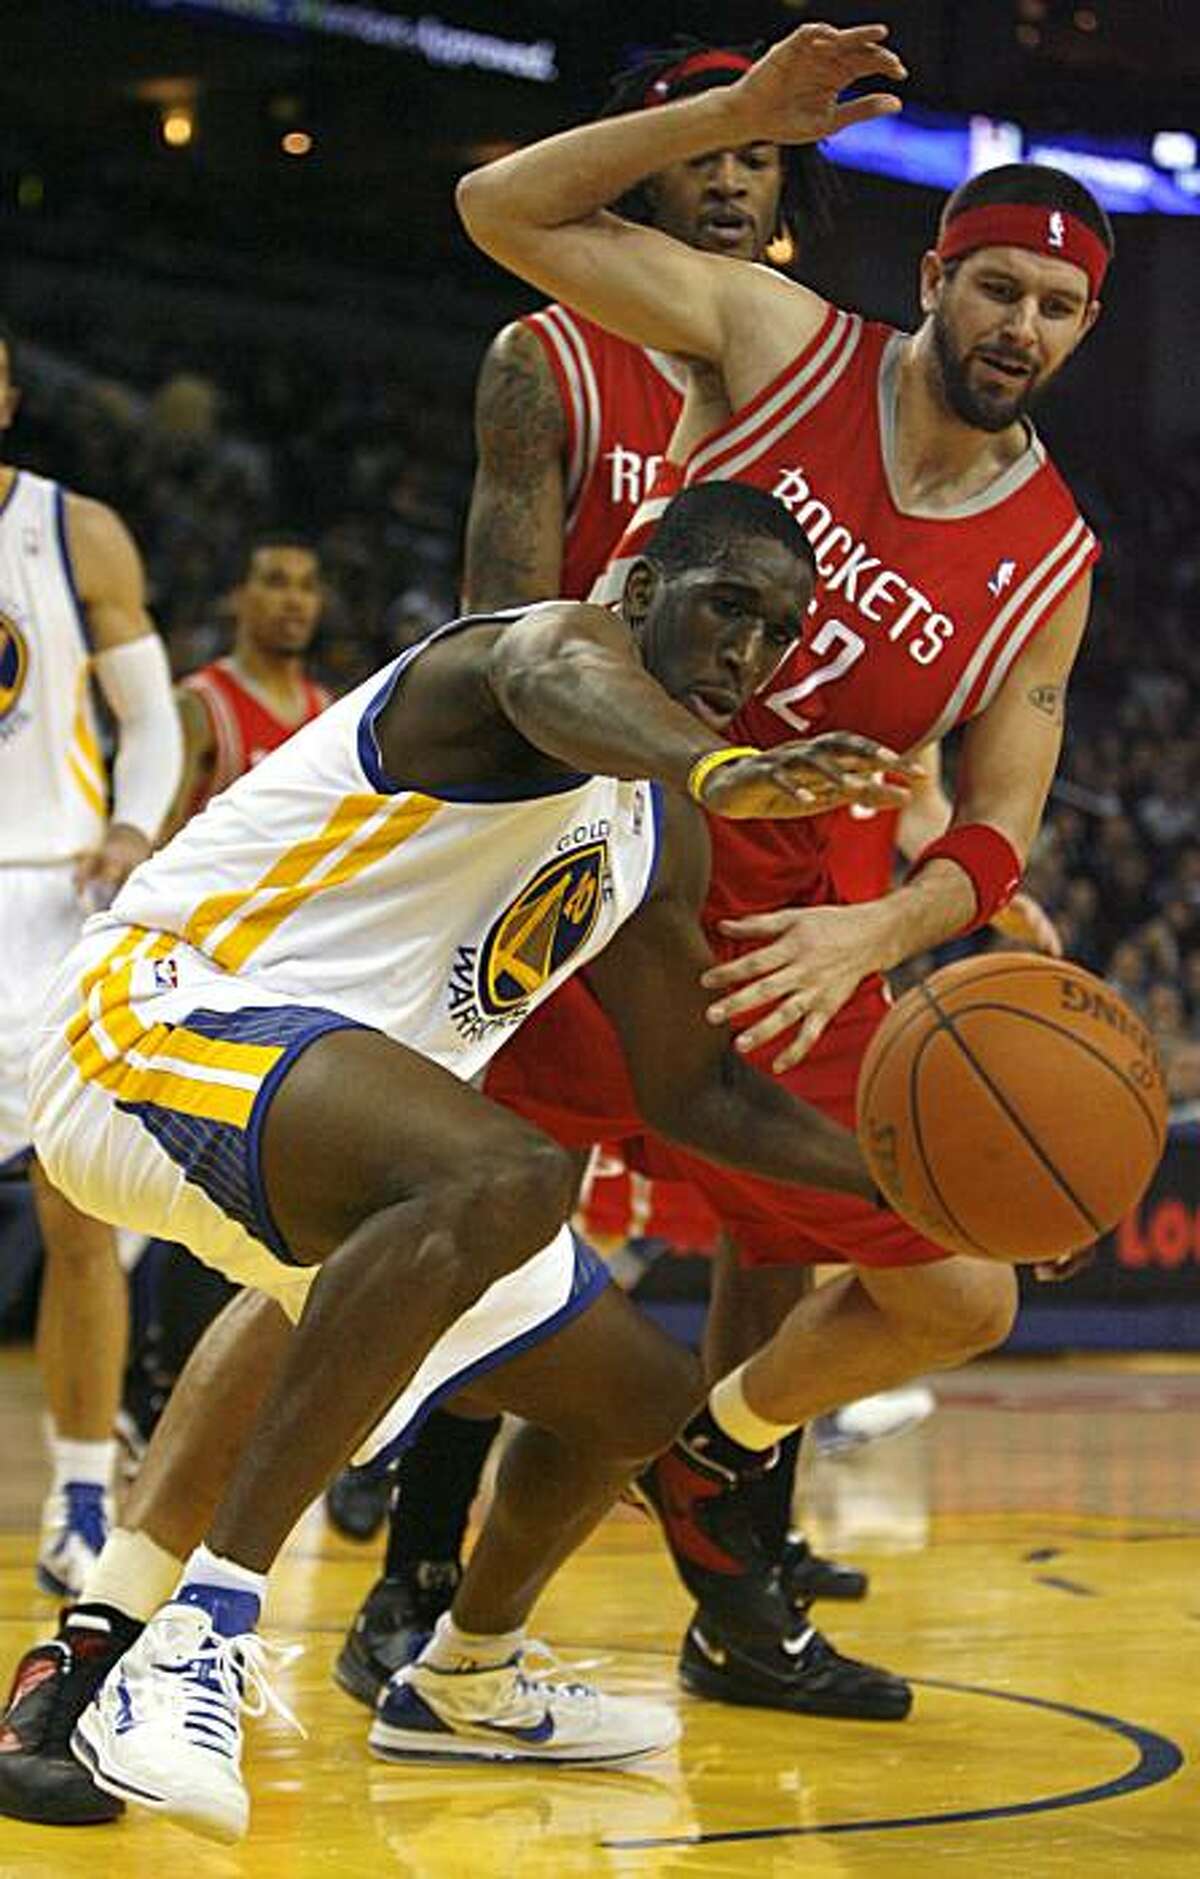 Golden Gate Warriors Ekpe Udoh, (20), tries to gain control of the ball after knocking it lose from Houston Rockets Brad Miller's hand, (52), in the first quarter, Monday, Dec. 20, 2010 at the Oracle Arena in Oakland, Calif.